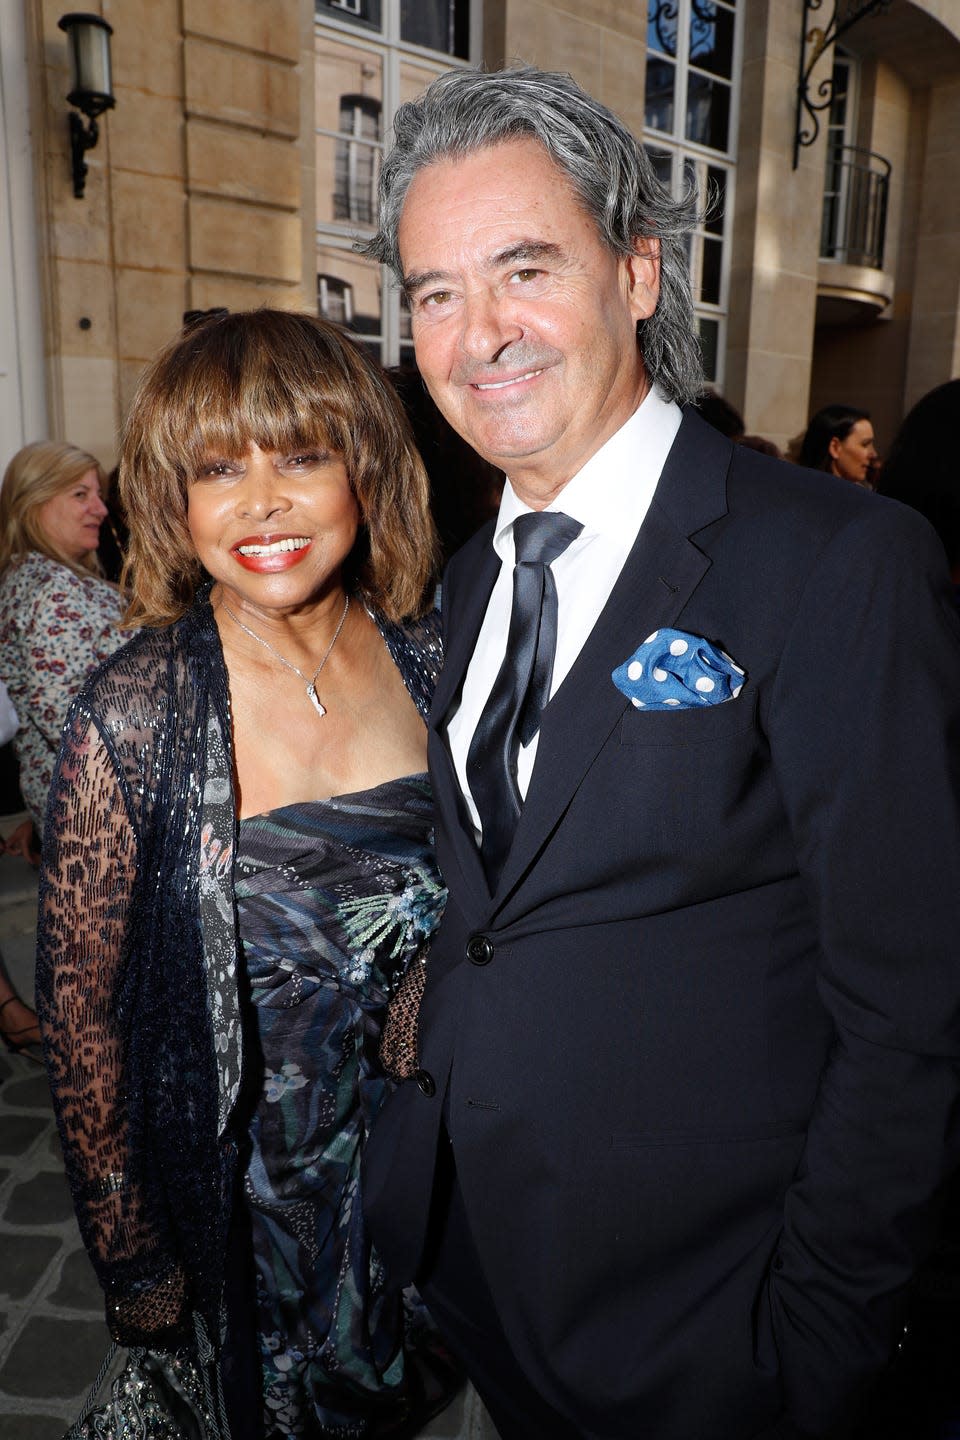 <p>Turner married Bach in 2013, after being with him for 27 years. </p><p>Speaking to <a href="https://www.hellomagazine.com/brides/2013072613767/tina-turner-wedding-exclusive/" rel="nofollow noopener" target="_blank" data-ylk="slk:Hello!" class="link ">Hello!</a> after their nuptials, she gushed: 'It's that happiness that people talk about, when you wish for nothing, when you can finally take a deep breath and say, "Everything is good."' </p>